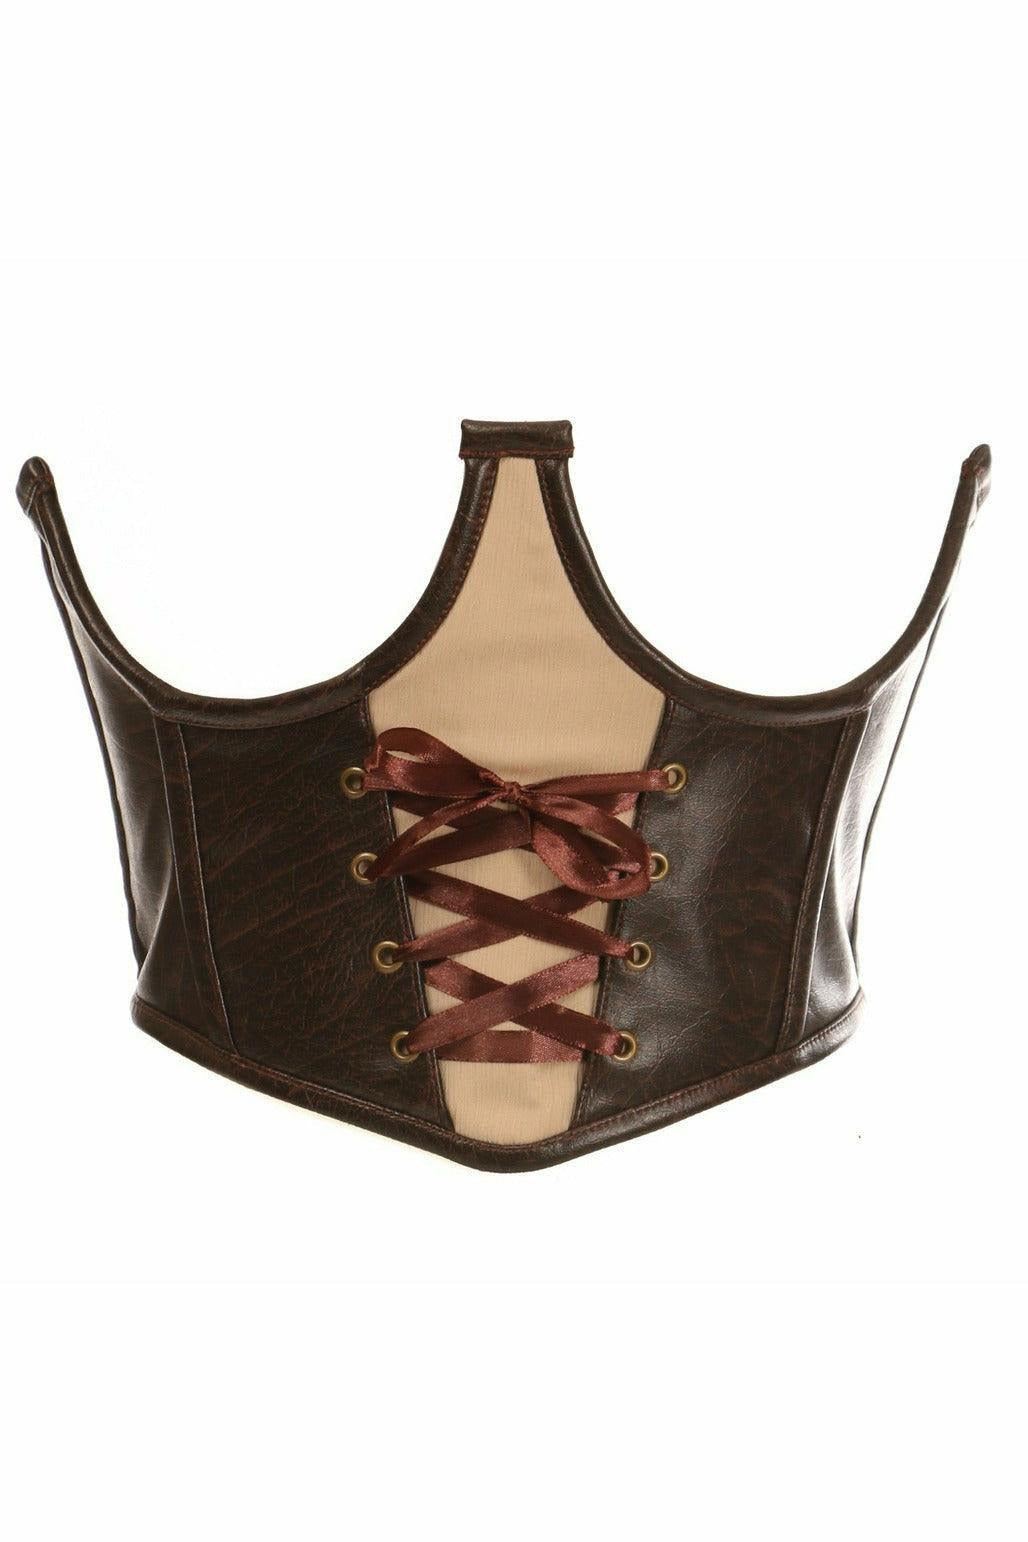 Top Drawer Faux Leather Steel Boned Lace-Up Open Cup Waist Cincher